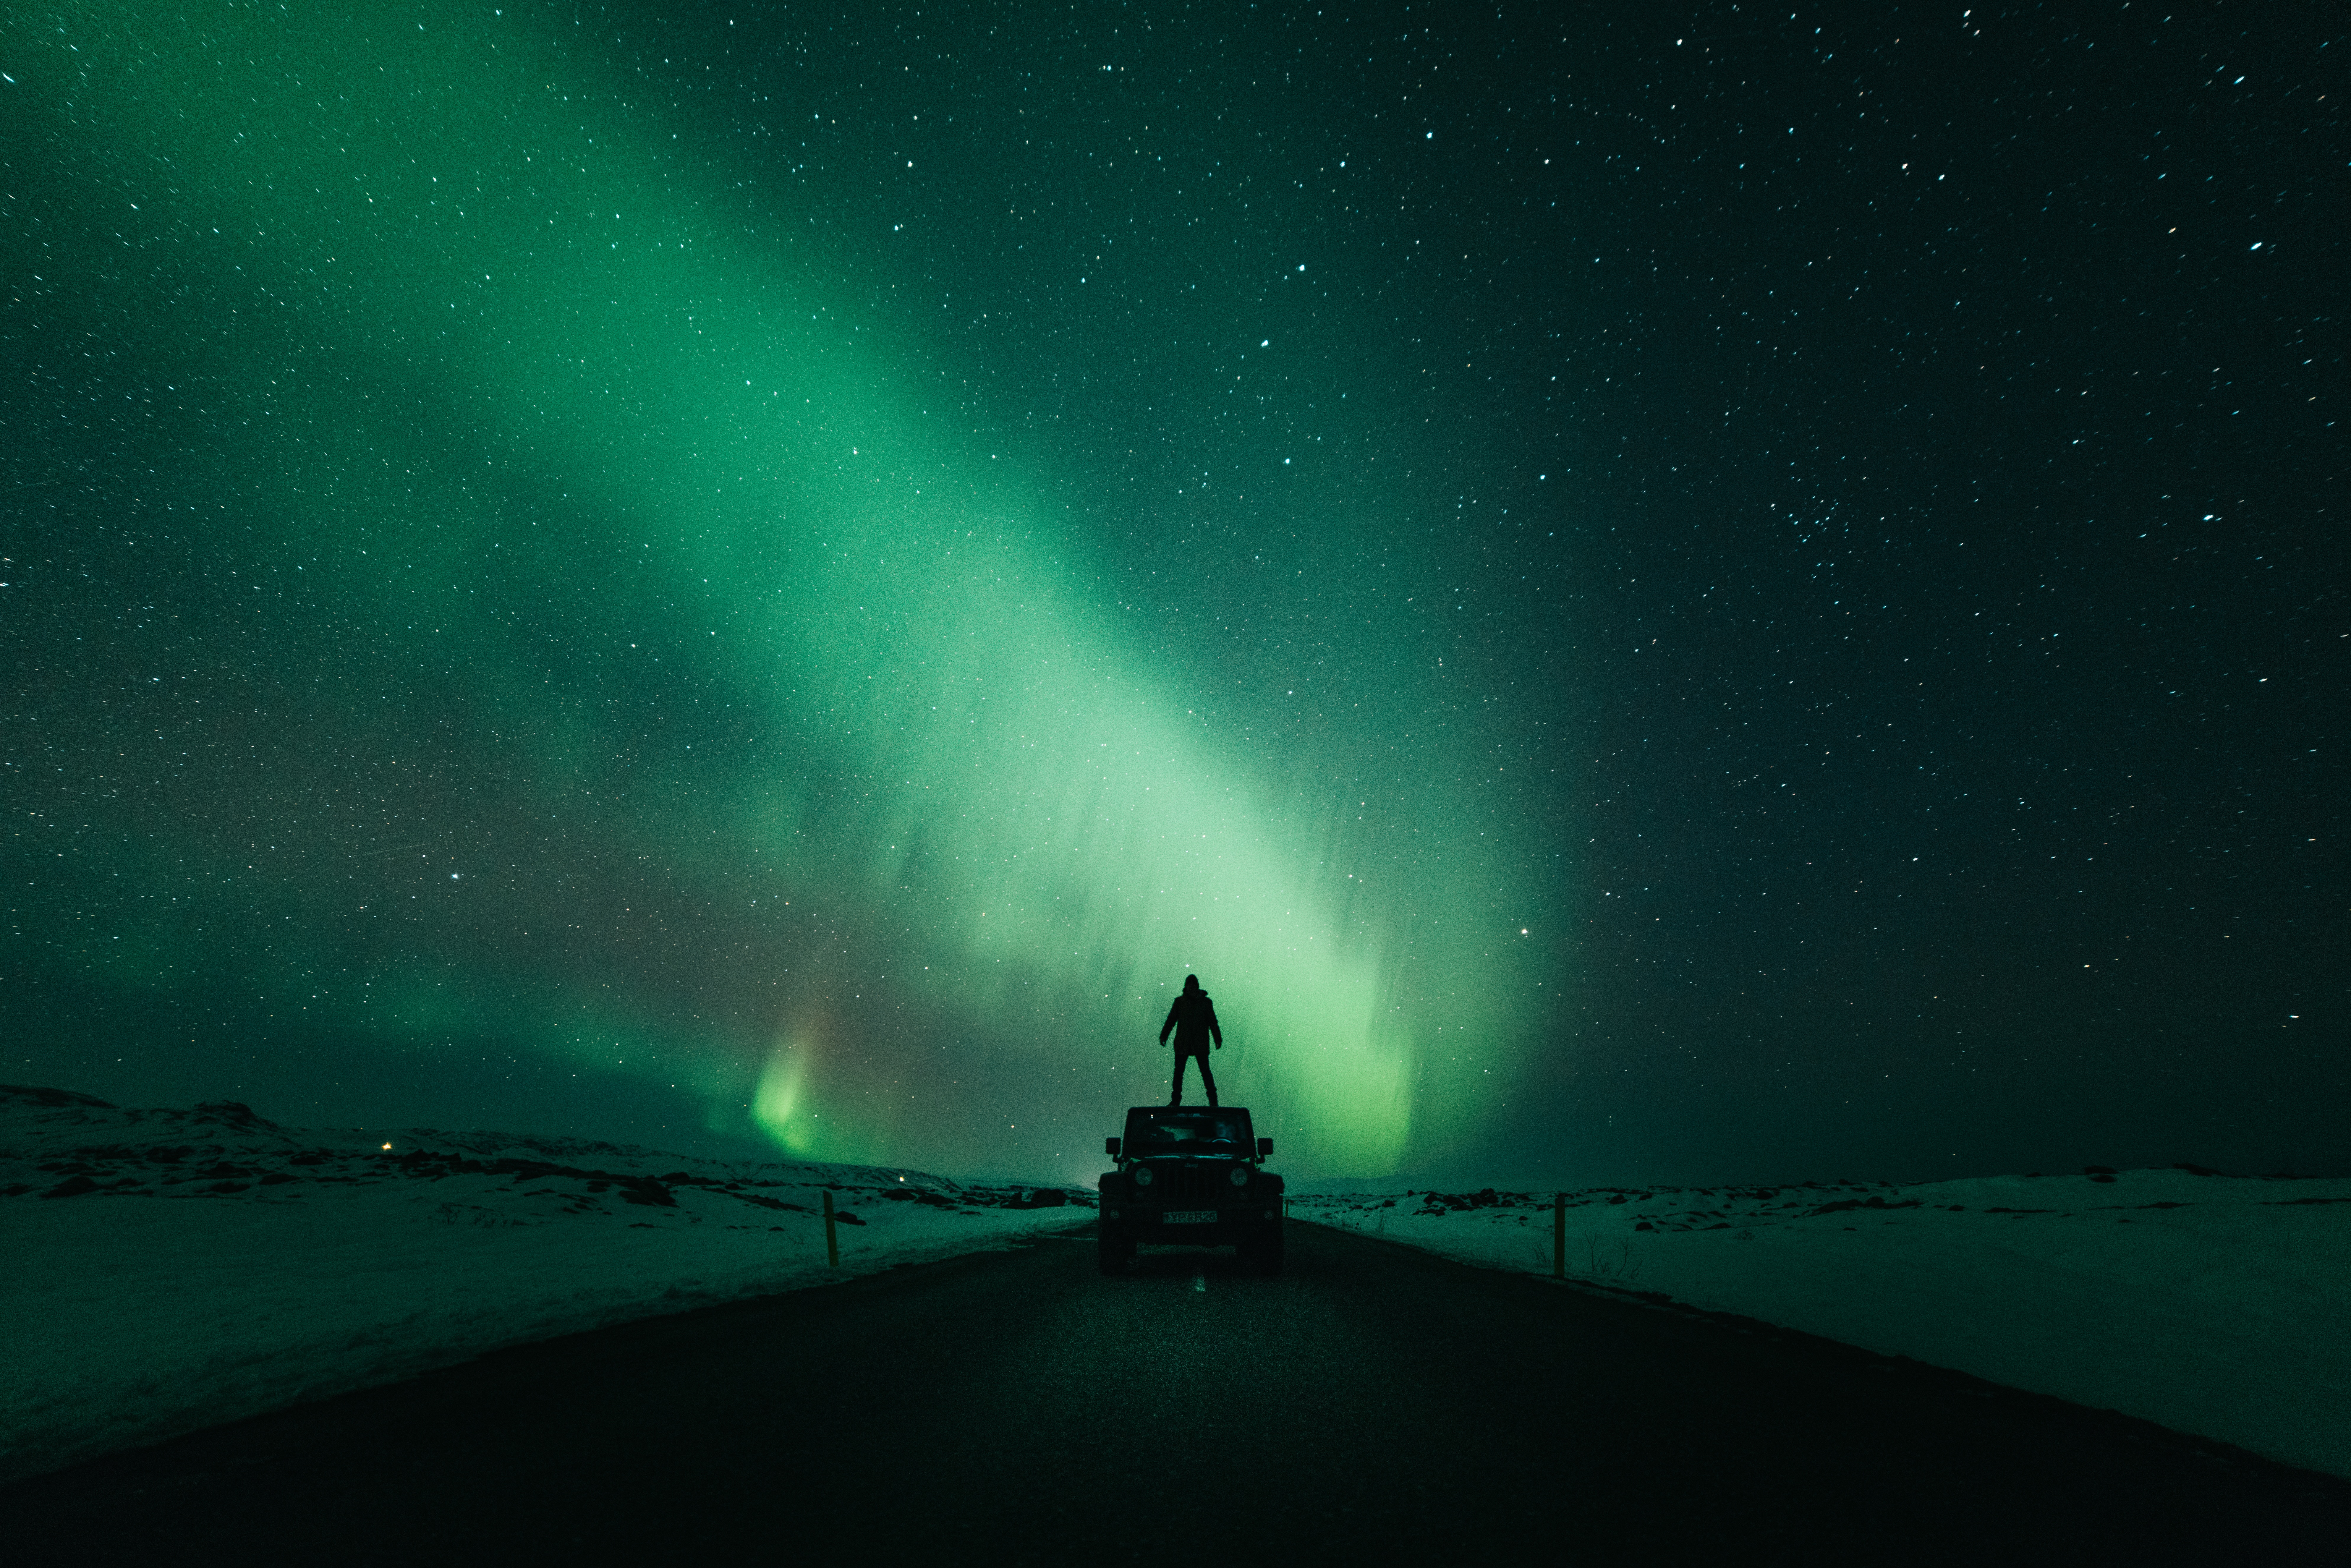 General 7952x5304 landscape aurorae night vehicle minimalism space stars highway photography alone desert nature environment green car Jeep sky snow road Kristopher Roller men solice